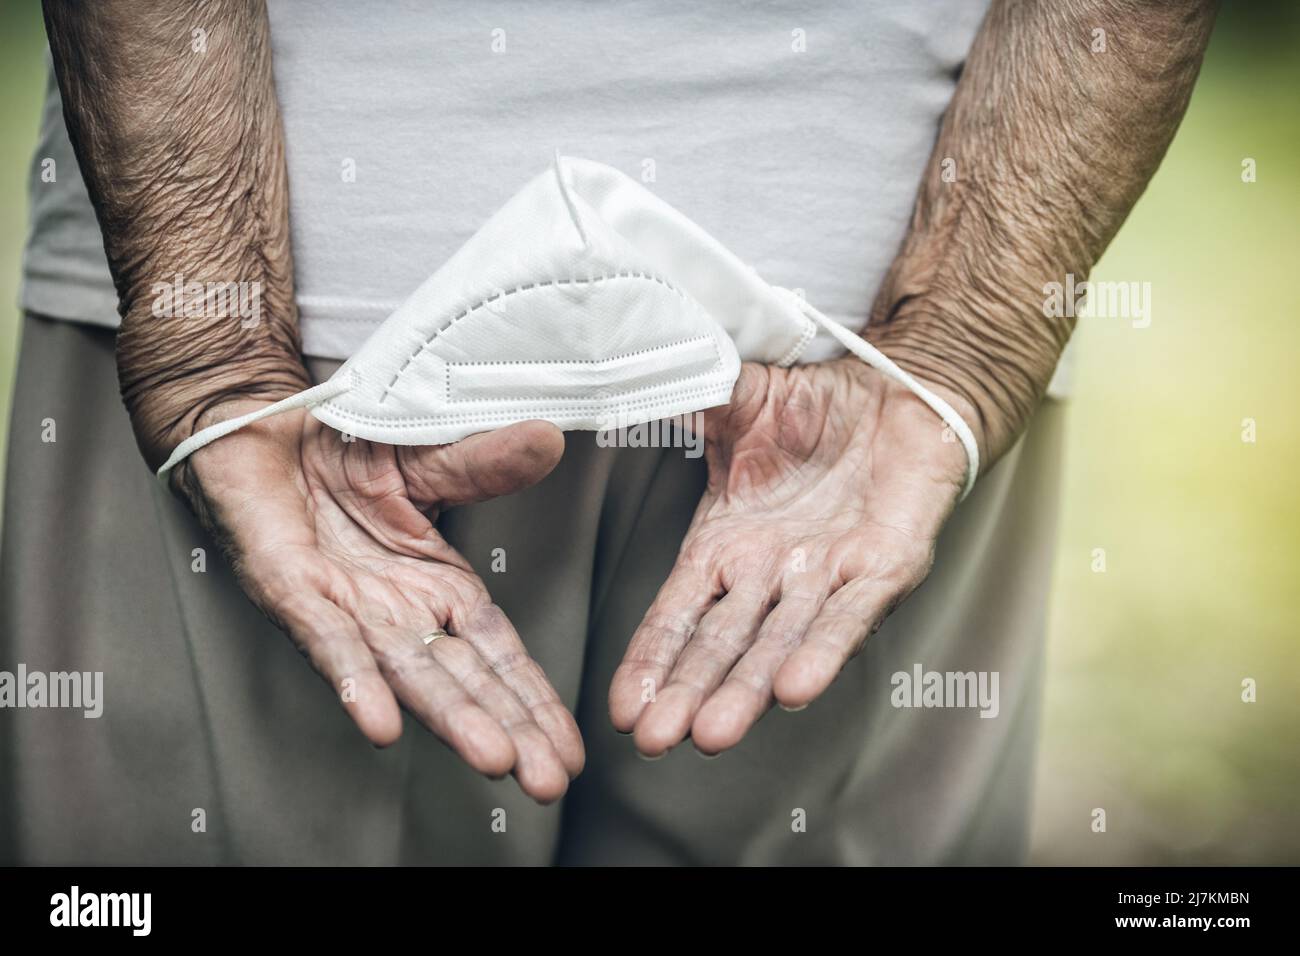 Elderly woman with a face mask during lockdown Stock Photo